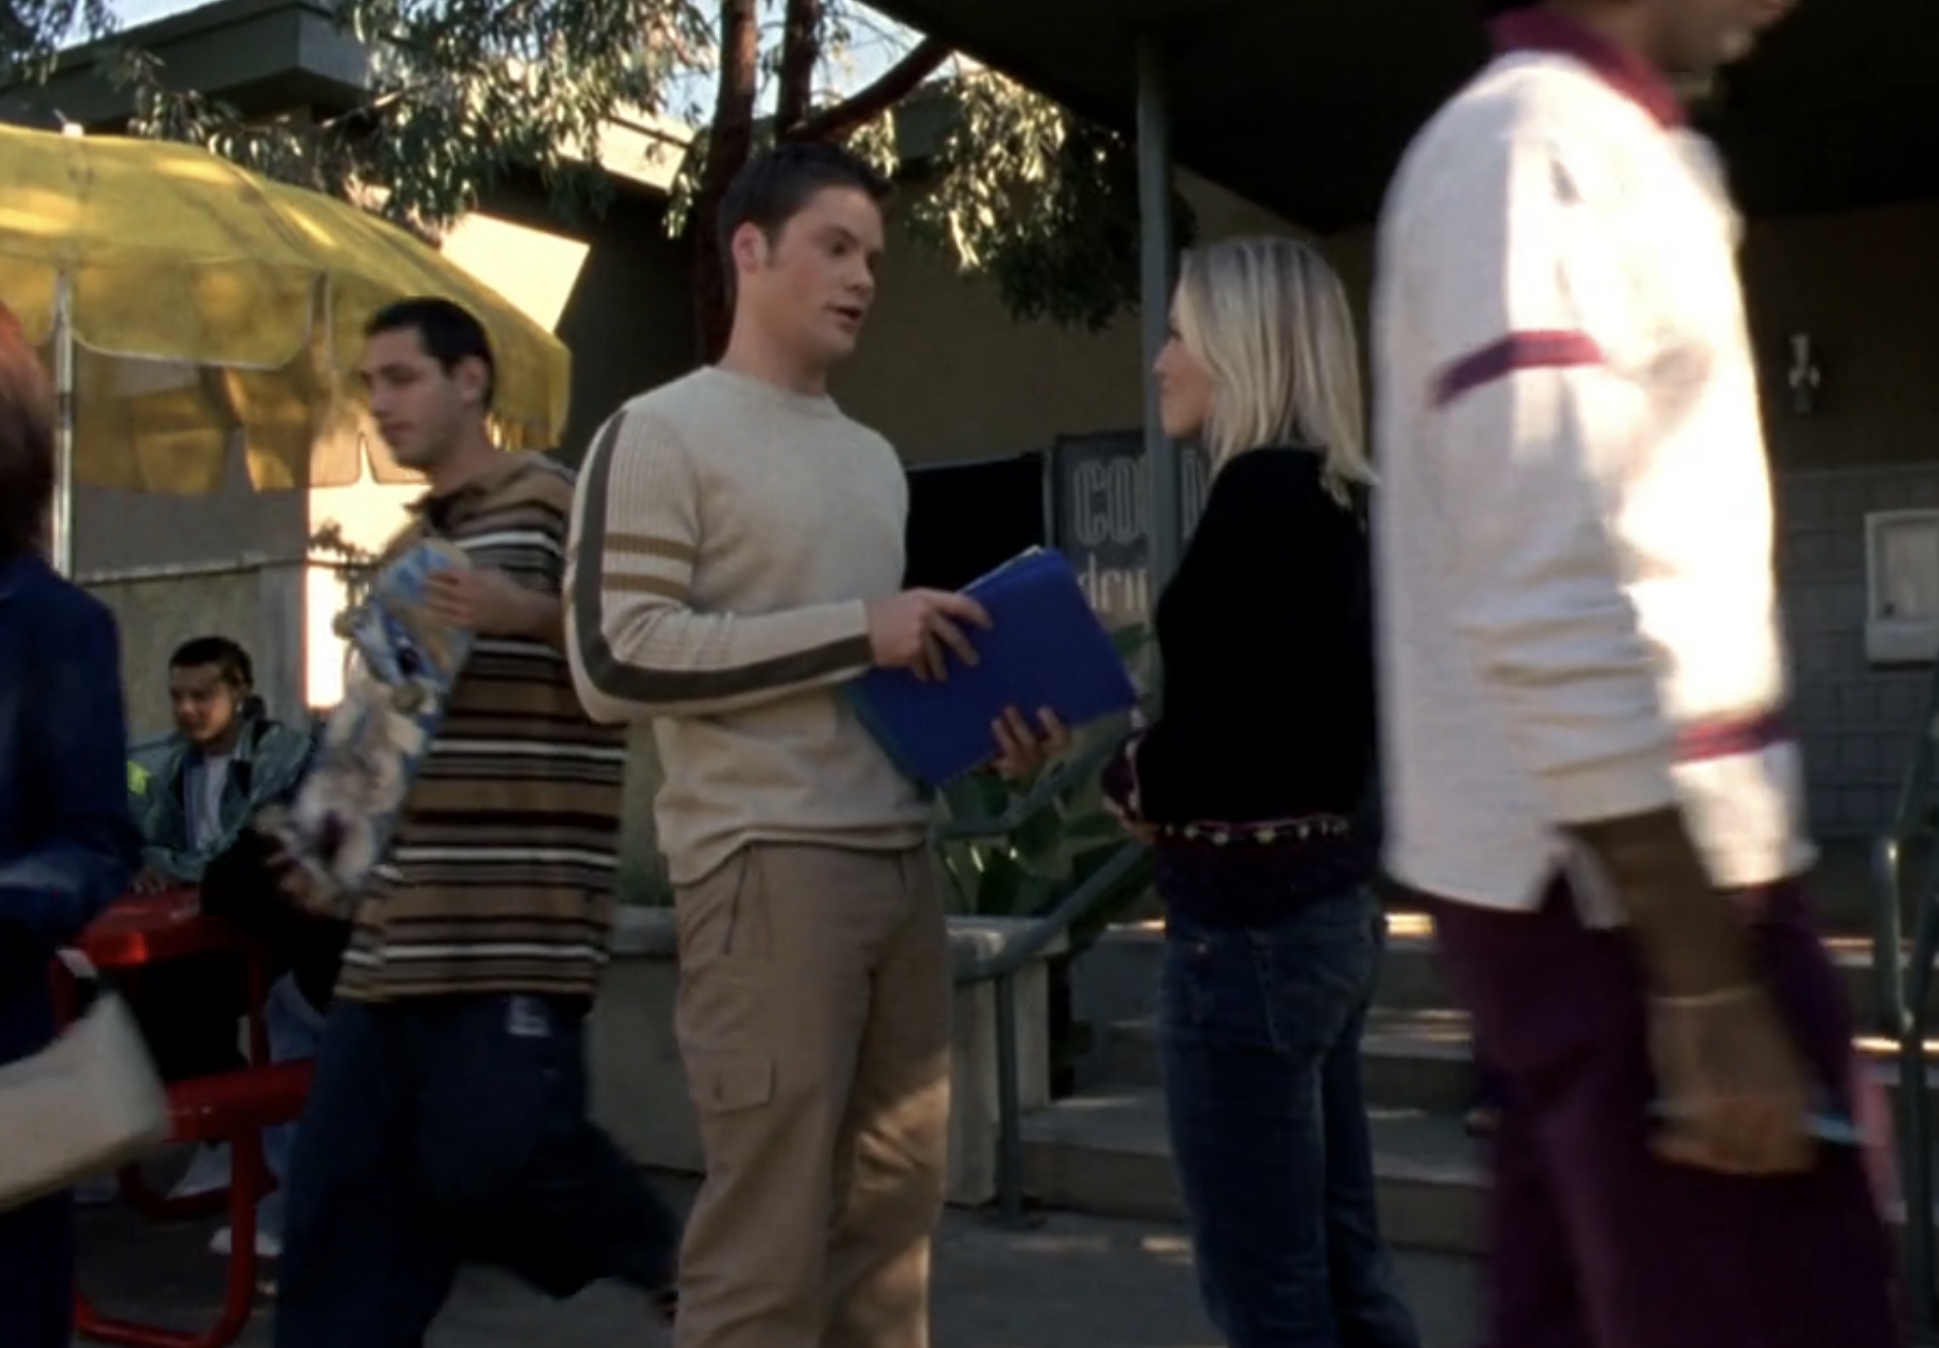 Screenshot from S1E14 of Veronica Mars. Duncan is wearing a cream-colored sweater with brown stripes and brown cargo pants. He's standing outside talking to Veronica.